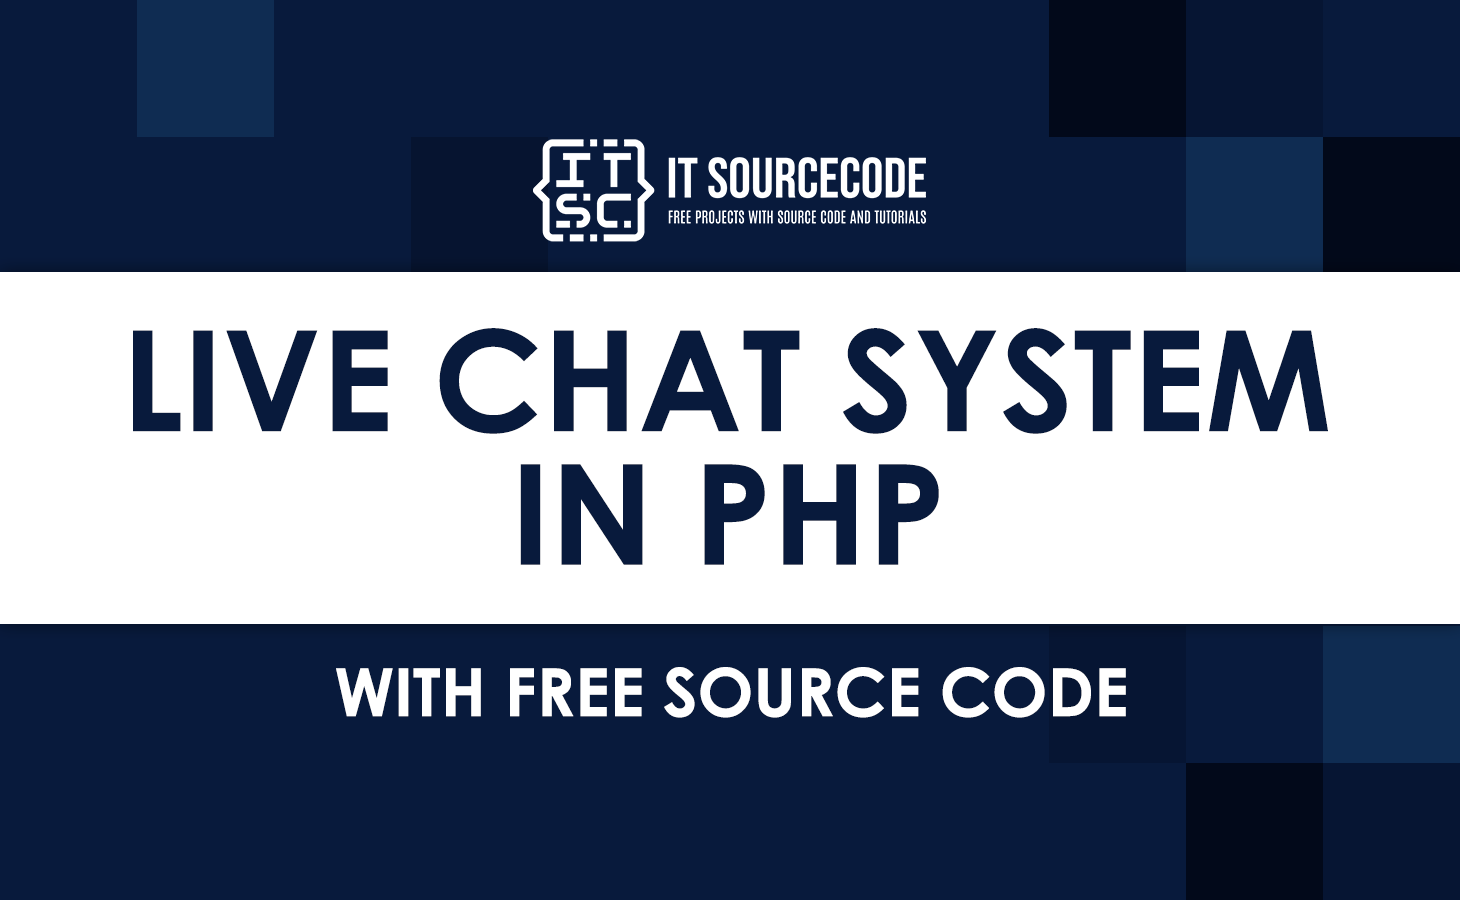 Live Chat System in PHP with source code